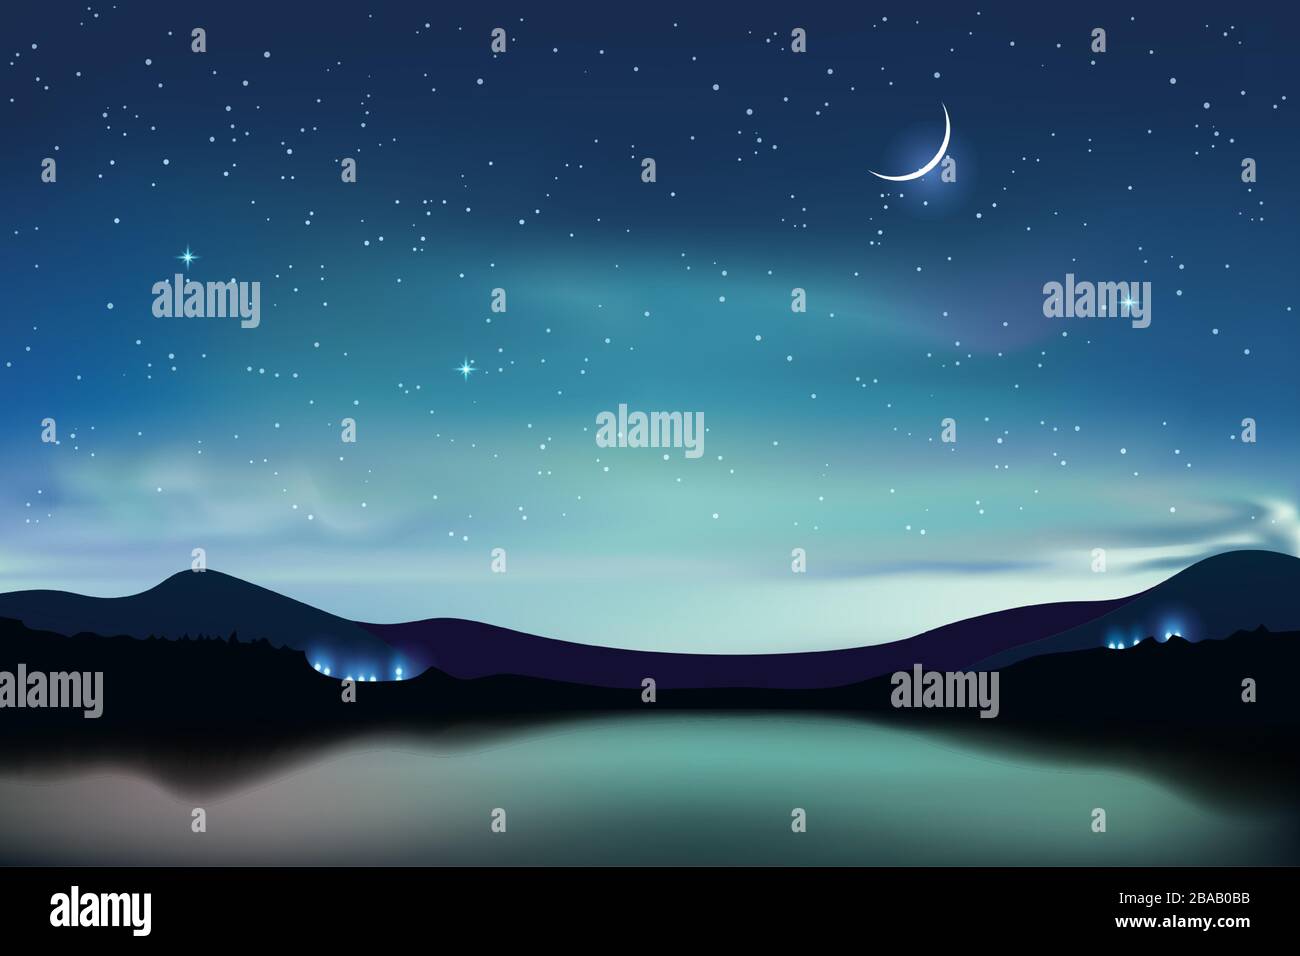 Mountain lake with dark turquoise starry sky and a crescent moon, night sky realistic background, vector illustration. Stock Vector